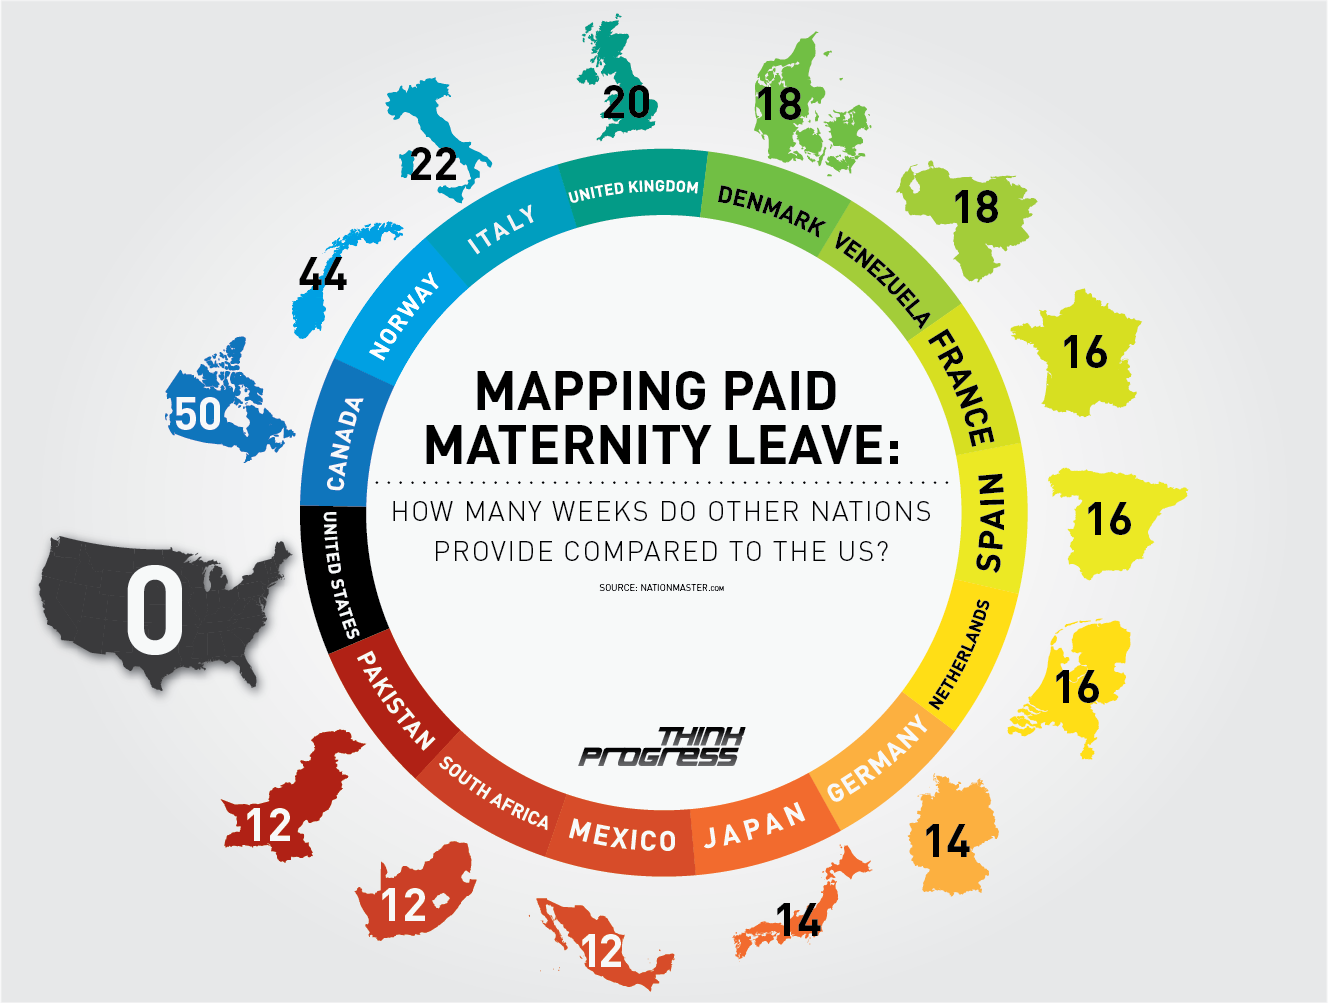 FAMILY Act How Maternity Leave Is Changing in the US HR, Payroll